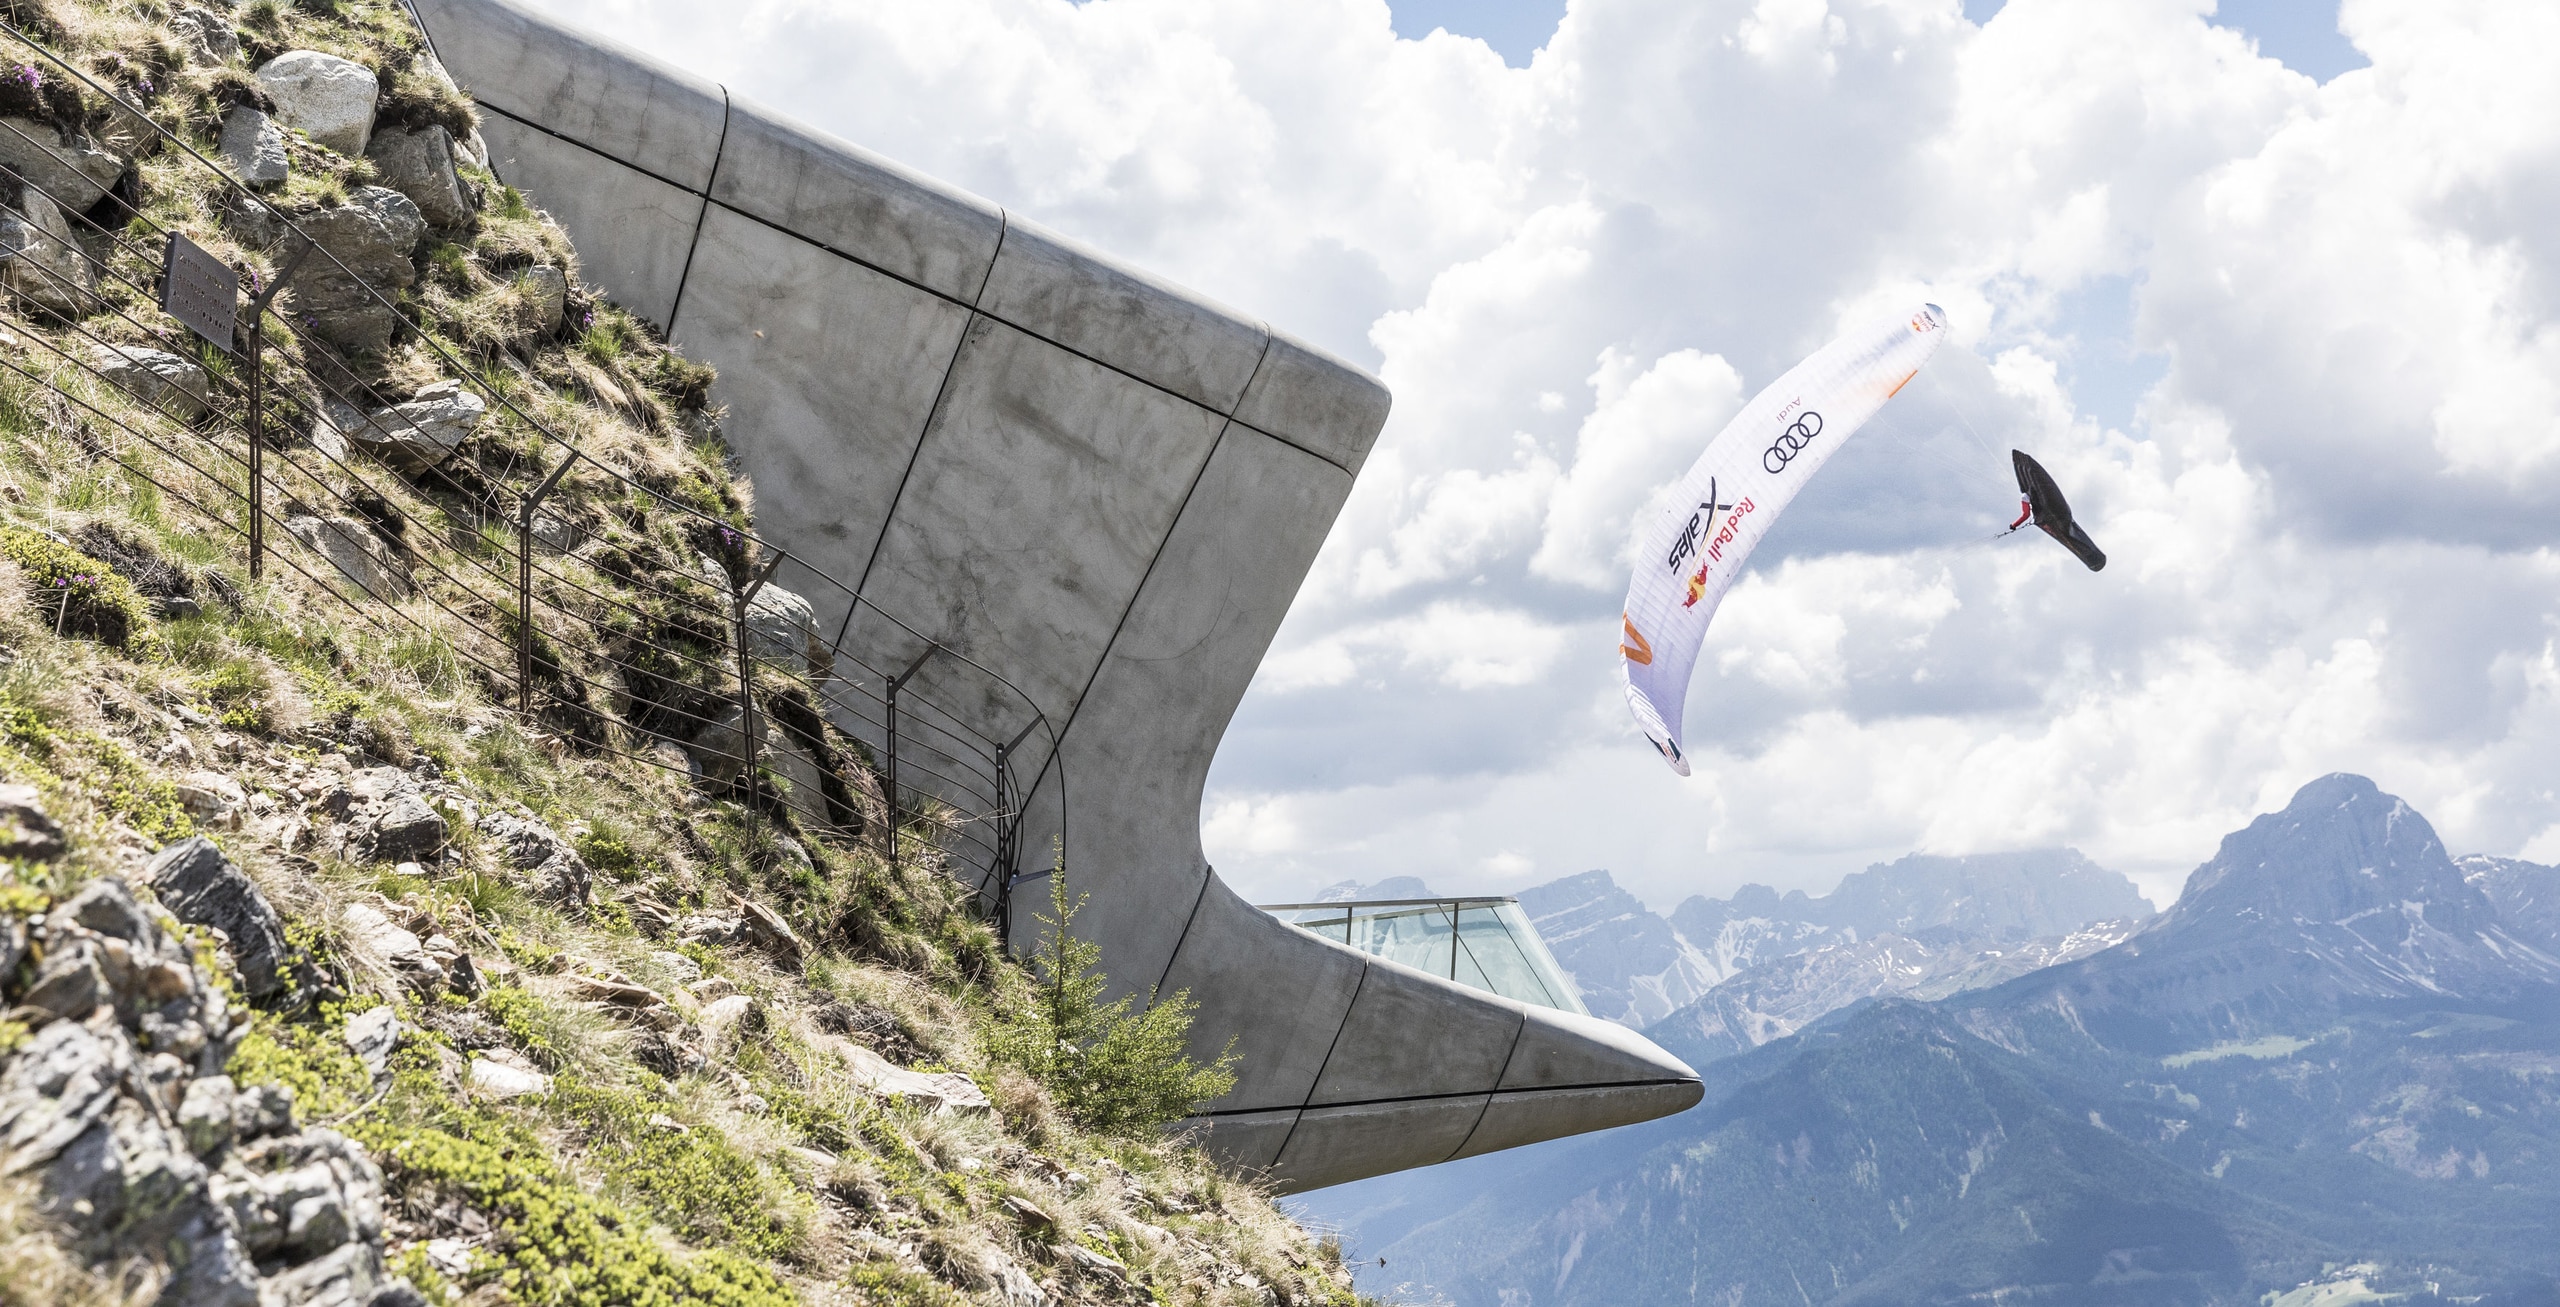 Turnpoint 4 during the Red Bull X-Alps at Kronplatz, Italy on June 18, 2019